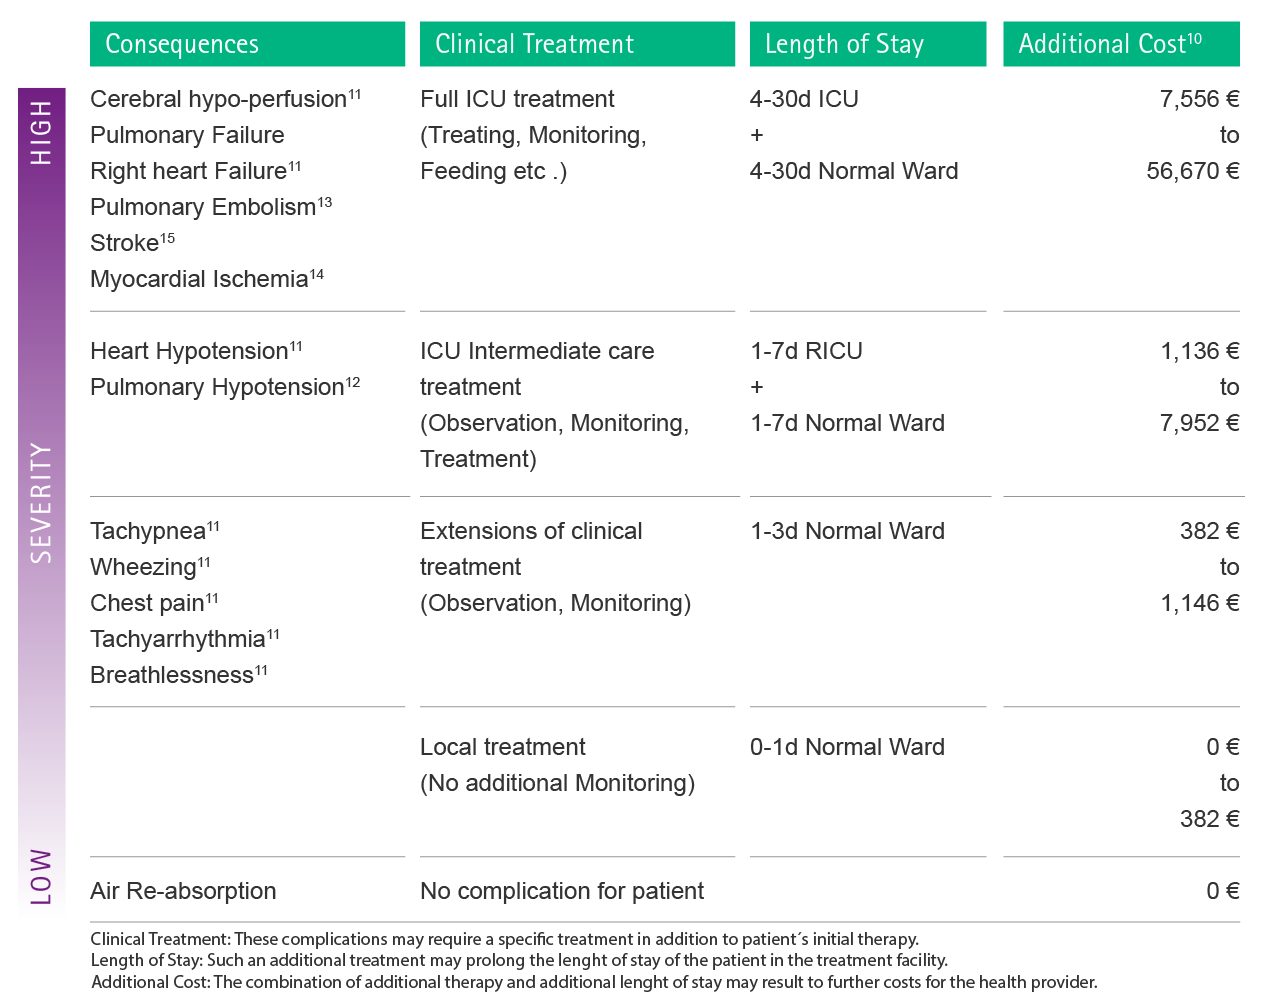 Table with estimations of possible additional costs as a consequence of complications caused by air embolism.